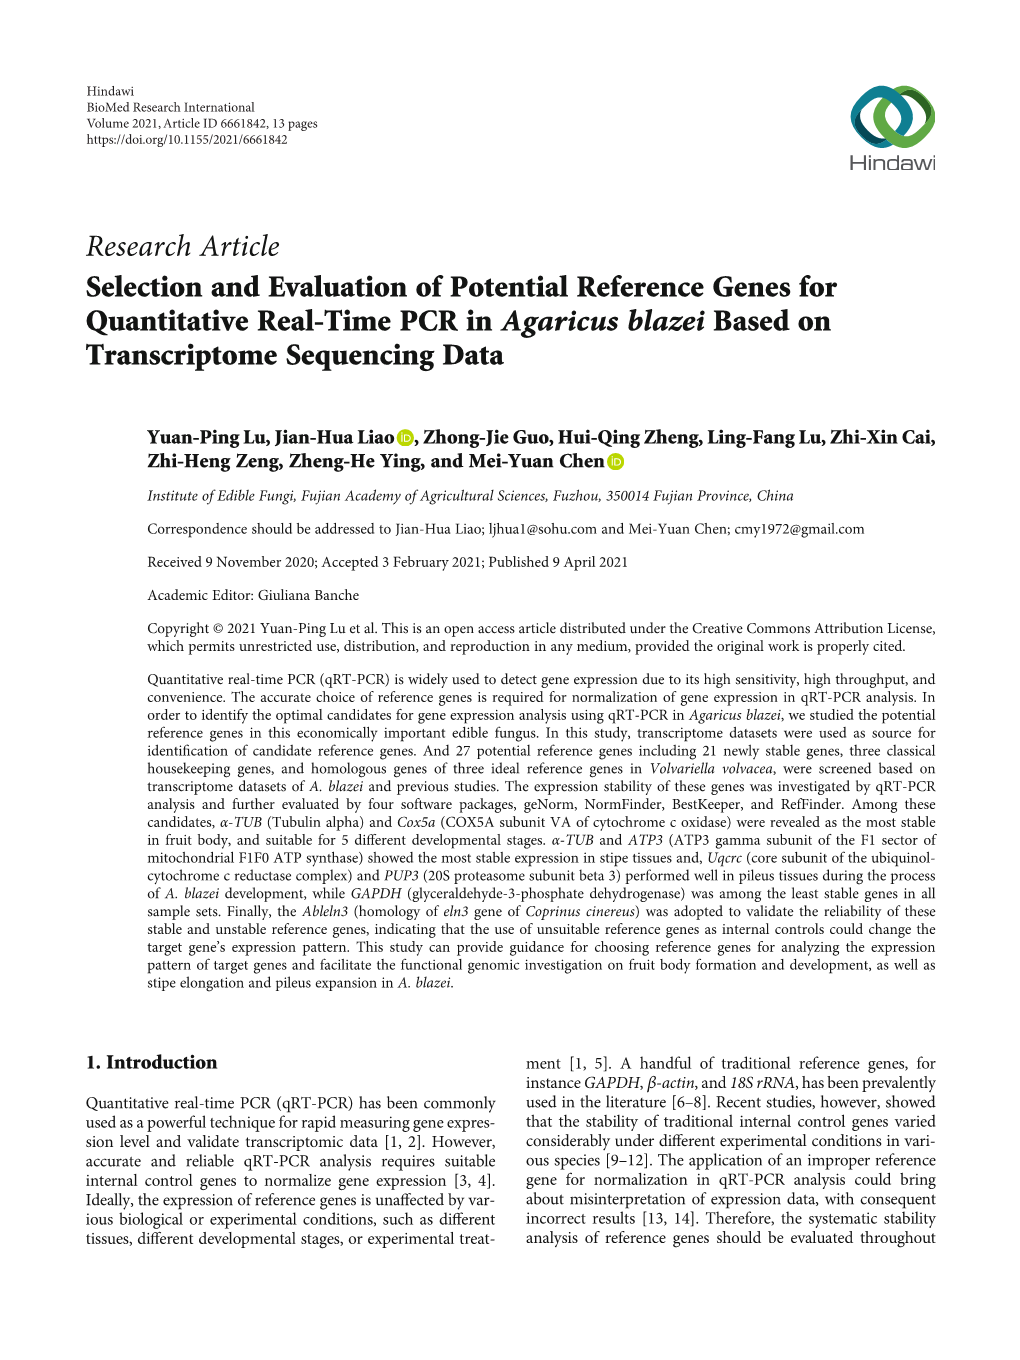 Selection and Evaluation of Potential Reference Genes for Quantitative Real-Time PCR in Agaricus Blazei Based on Transcriptome Sequencing Data